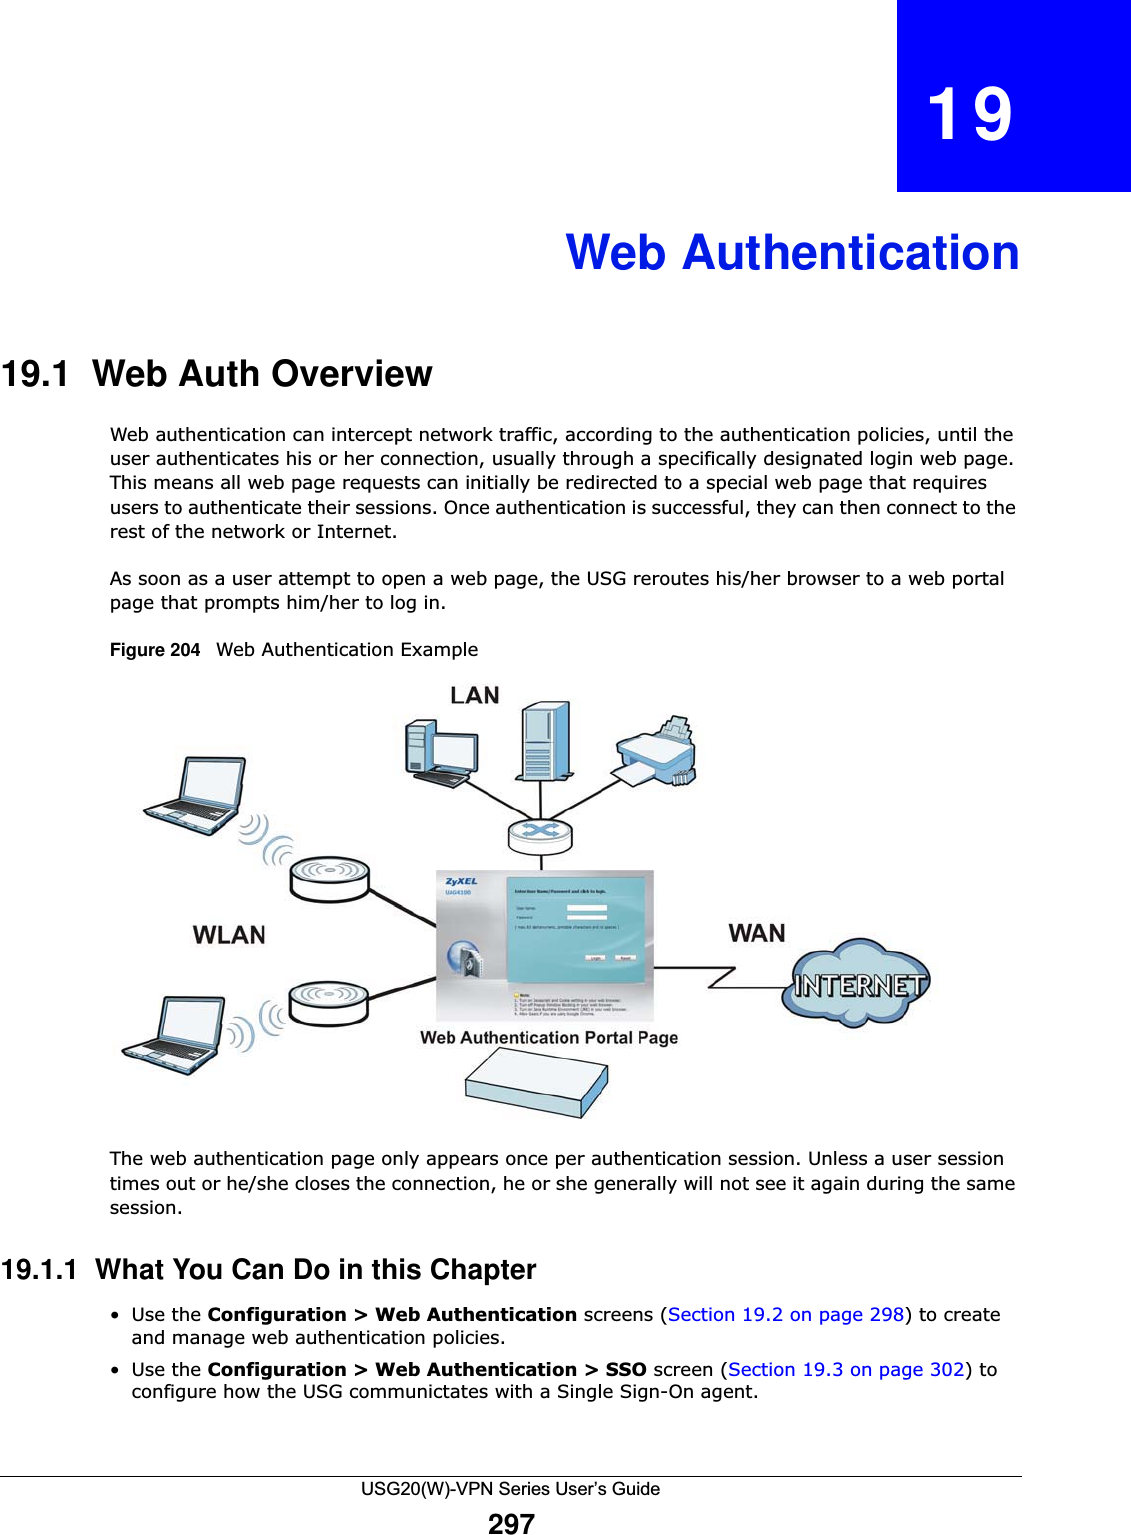 USG20(W)-VPN Series User’s Guide297CHAPTER   19Web Authentication19.1  Web Auth Overview Web authentication can intercept network traffic, according to the authentication policies, until the user authenticates his or her connection, usually through a specifically designated login web page. This means all web page requests can initially be redirected to a special web page that requires users to authenticate their sessions. Once authentication is successful, they can then connect to the rest of the network or Internet. As soon as a user attempt to open a web page, the USG reroutes his/her browser to a web portal page that prompts him/her to log in.Figure 204   Web Authentication ExampleThe web authentication page only appears once per authentication session. Unless a user session times out or he/she closes the connection, he or she generally will not see it again during the same session.19.1.1  What You Can Do in this Chapter•Use the Configuration &gt; Web Authentication screens (Section 19.2 on page 298) to create and manage web authentication policies.•Use the Configuration &gt; Web Authentication &gt; SSO screen (Section 19.3 on page 302) to configure how the USG communictates with a Single Sign-On agent.